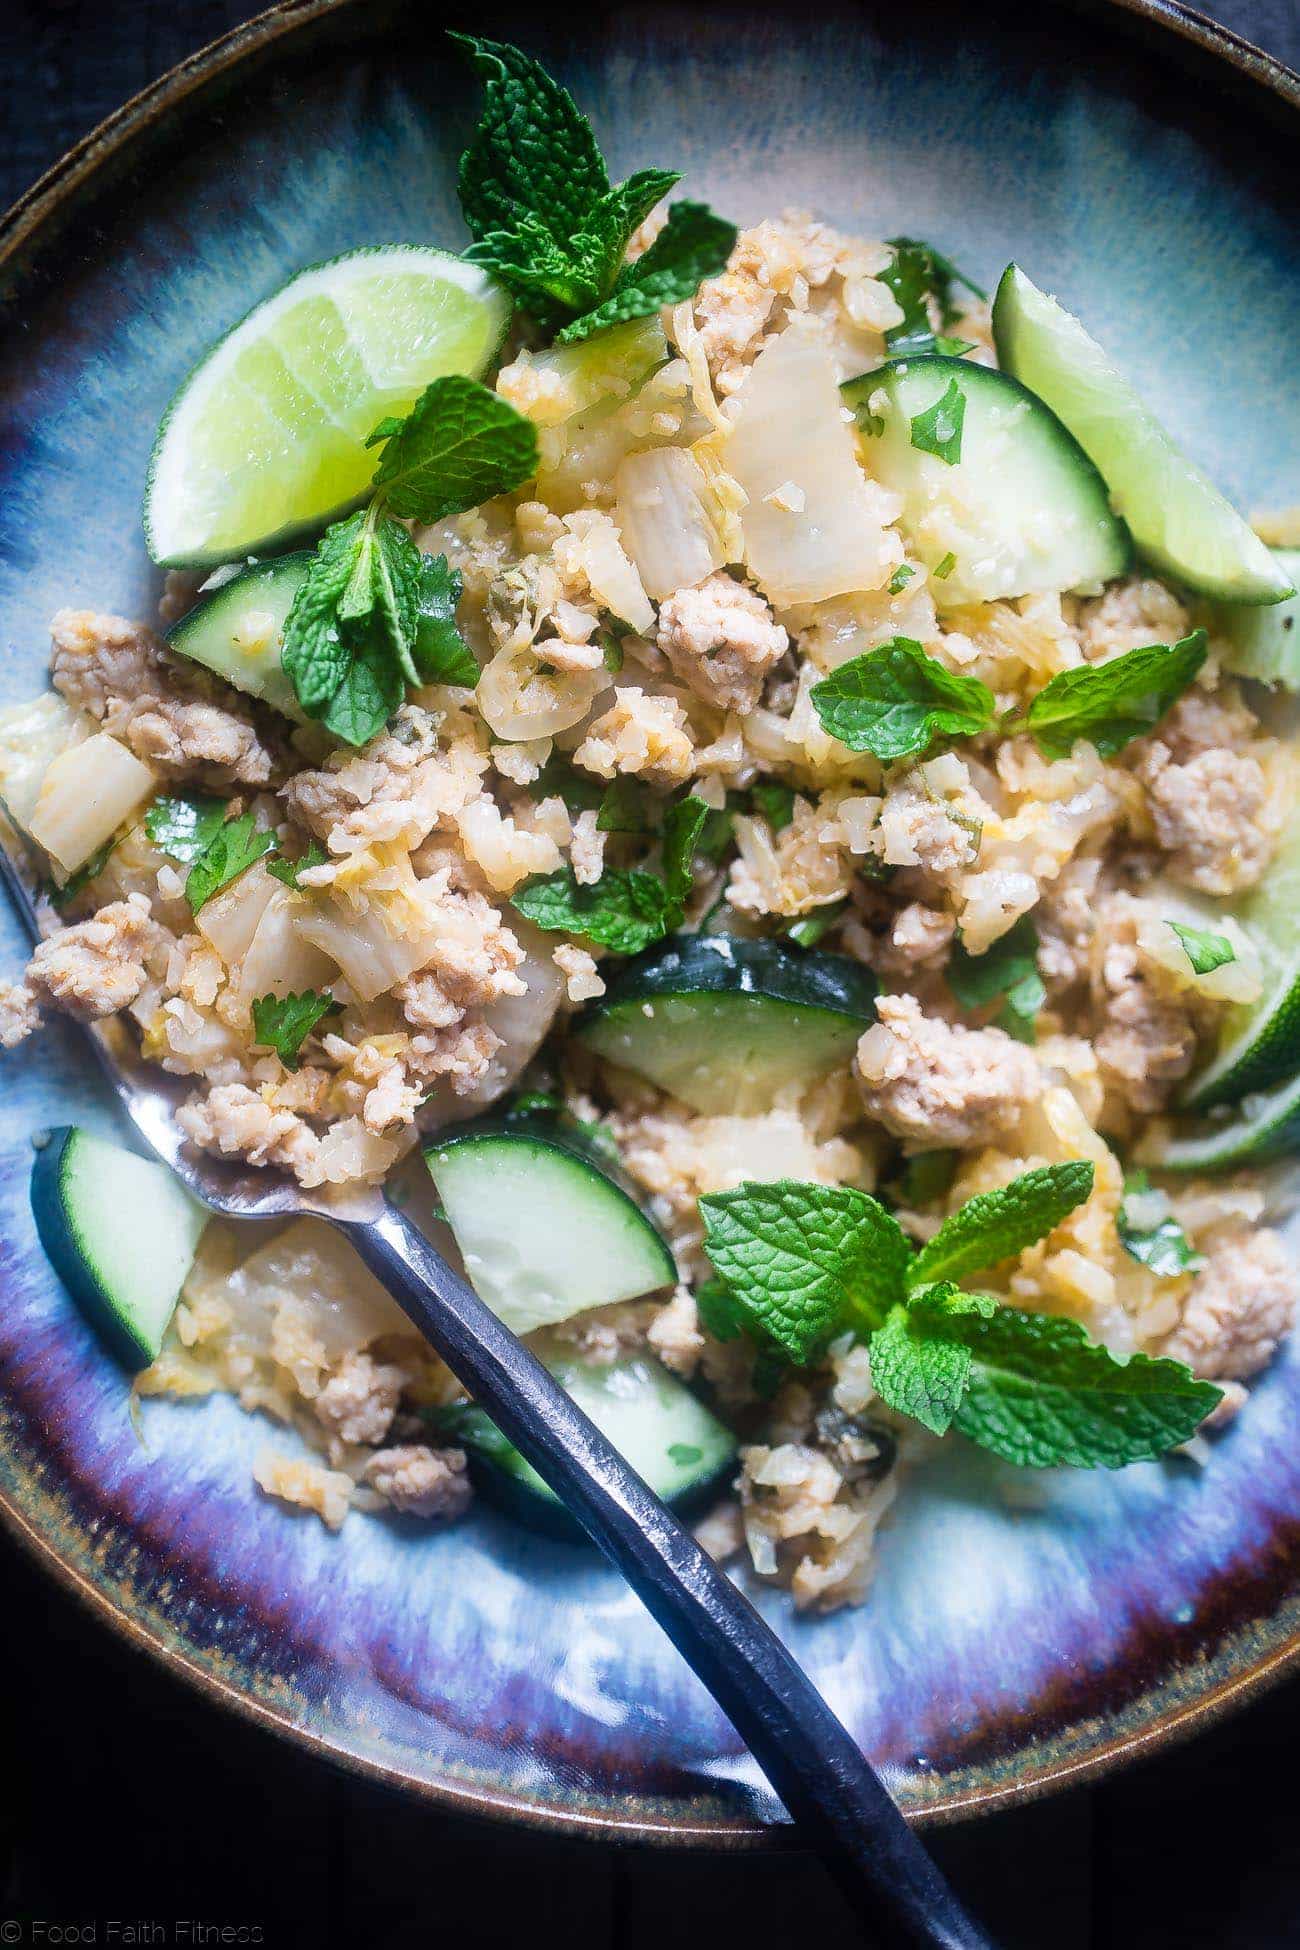 Larb Gai Thai Chicken Skillet - This easy, one pot dinner has all the flavors of Larb Gai, but in a healthy, low carb and whole30 approved weeknight dinner that is only 200 calories! | Foodfaithfitness.com | @FoodFaithFit